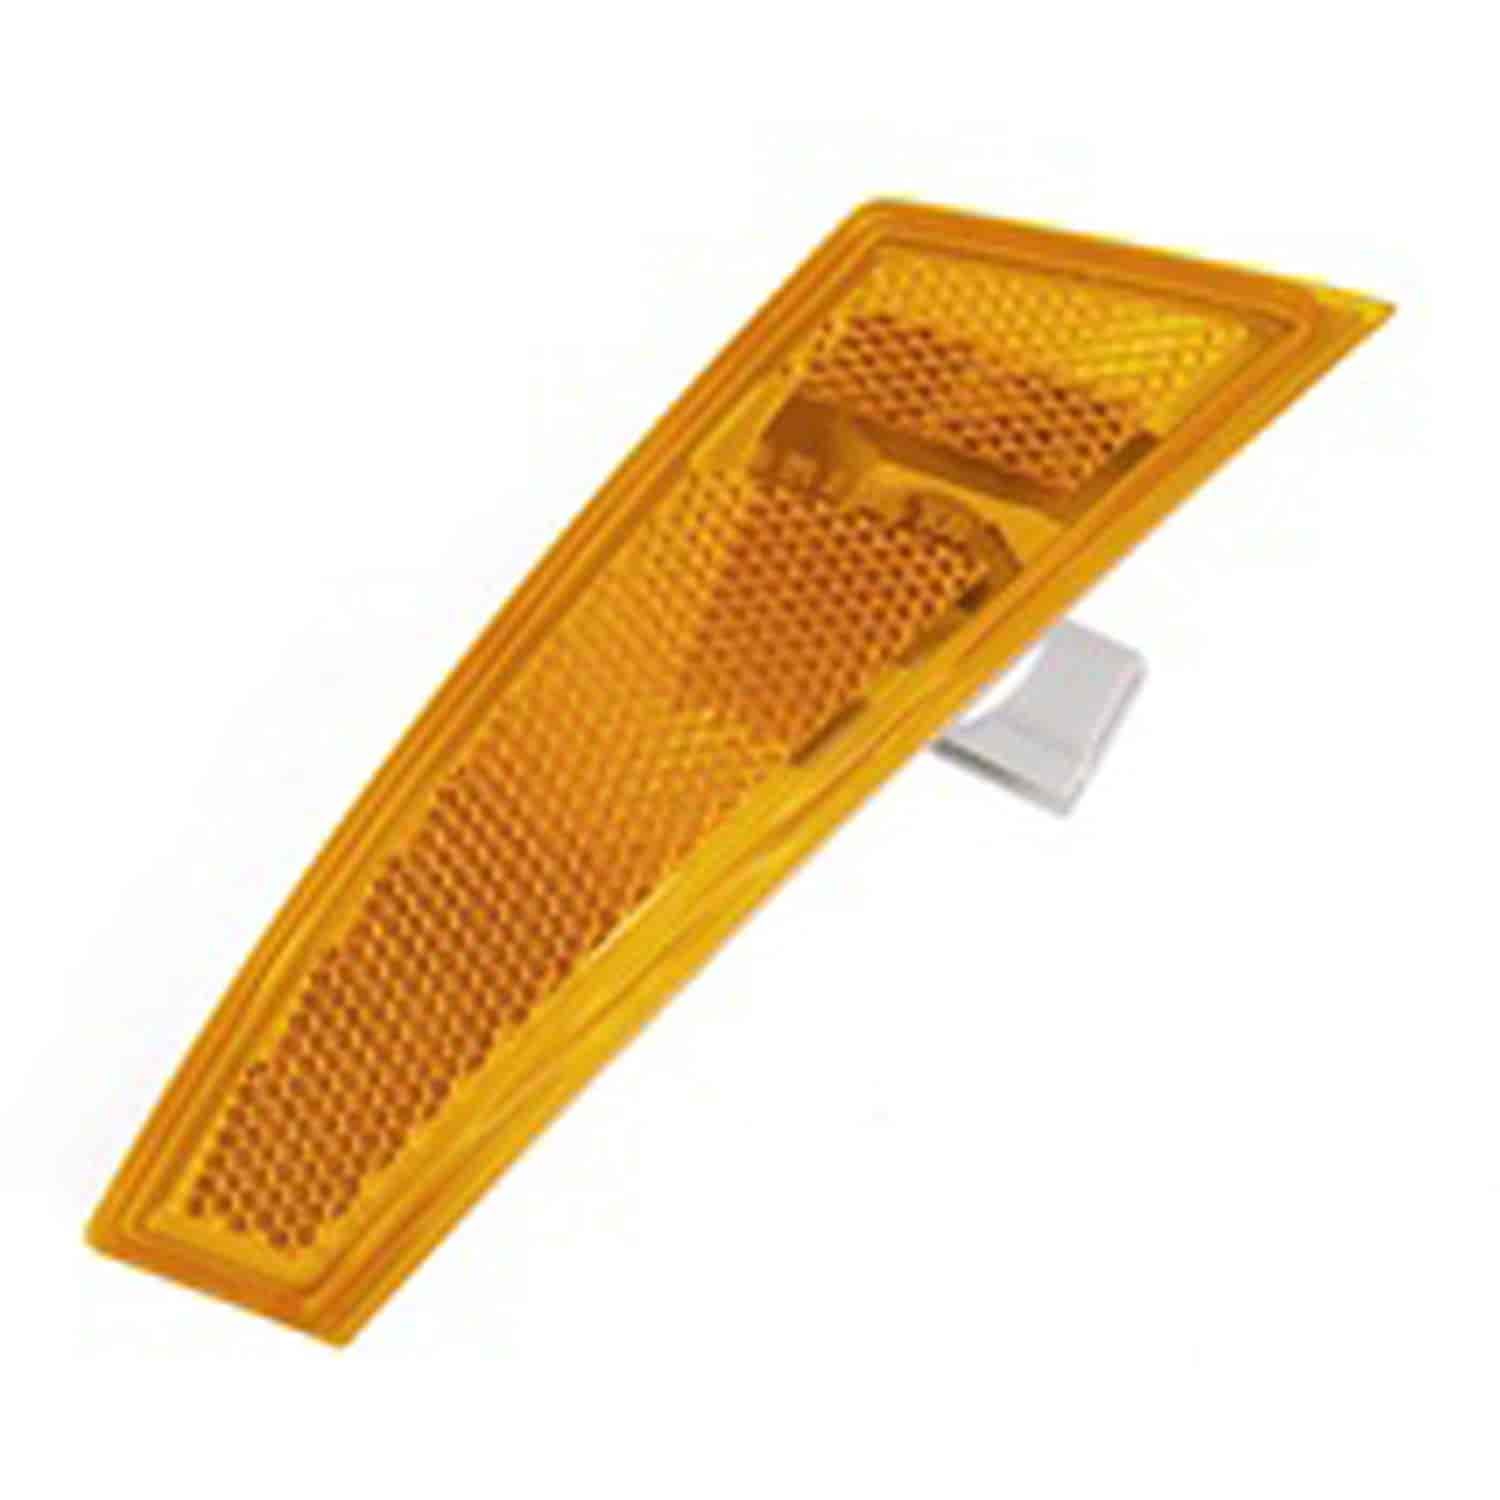 Replacement side marker lamp from Omix-ADA, Fits left side of 08-10 Jeep Liberty KKs.